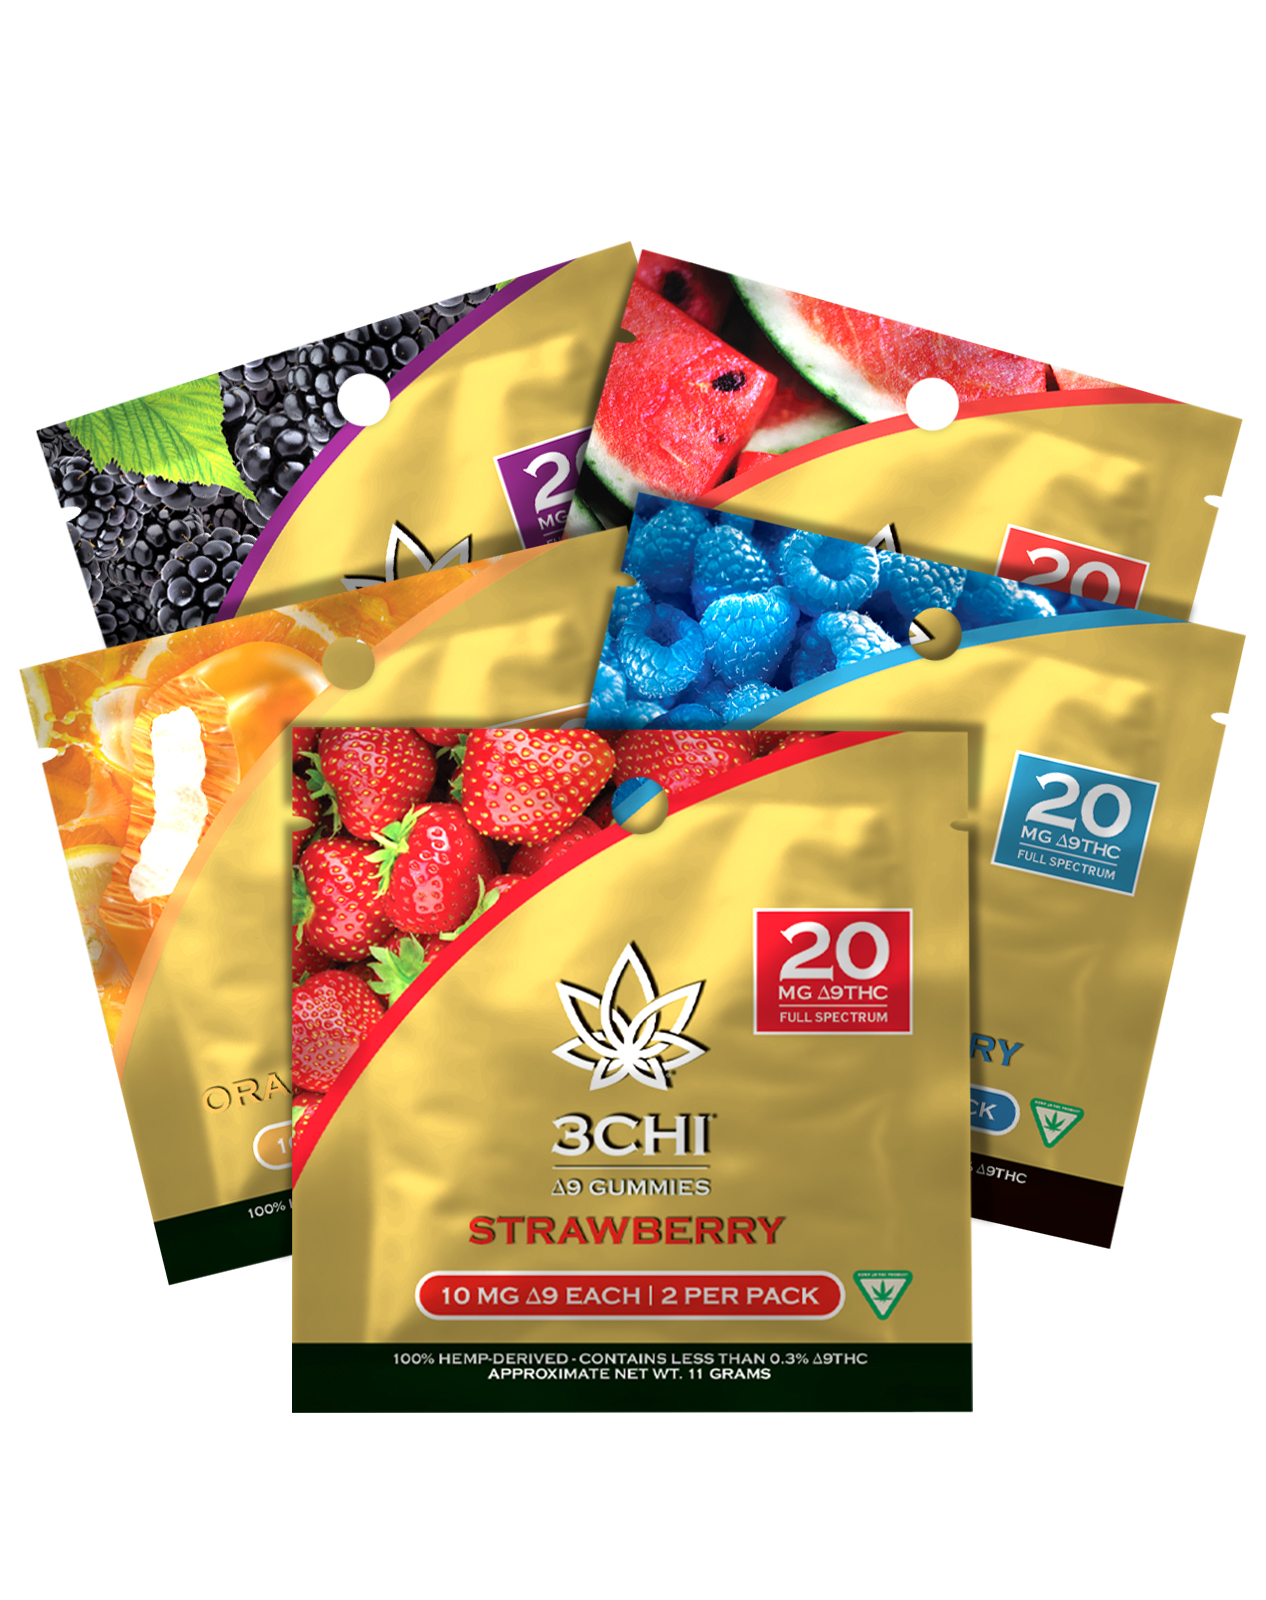 3CHI Delta 9 THC gummies come in a variety of flavors. Our blue raspberry flavor can give you that berry buzz feeling if you want a burst of berry flavor.